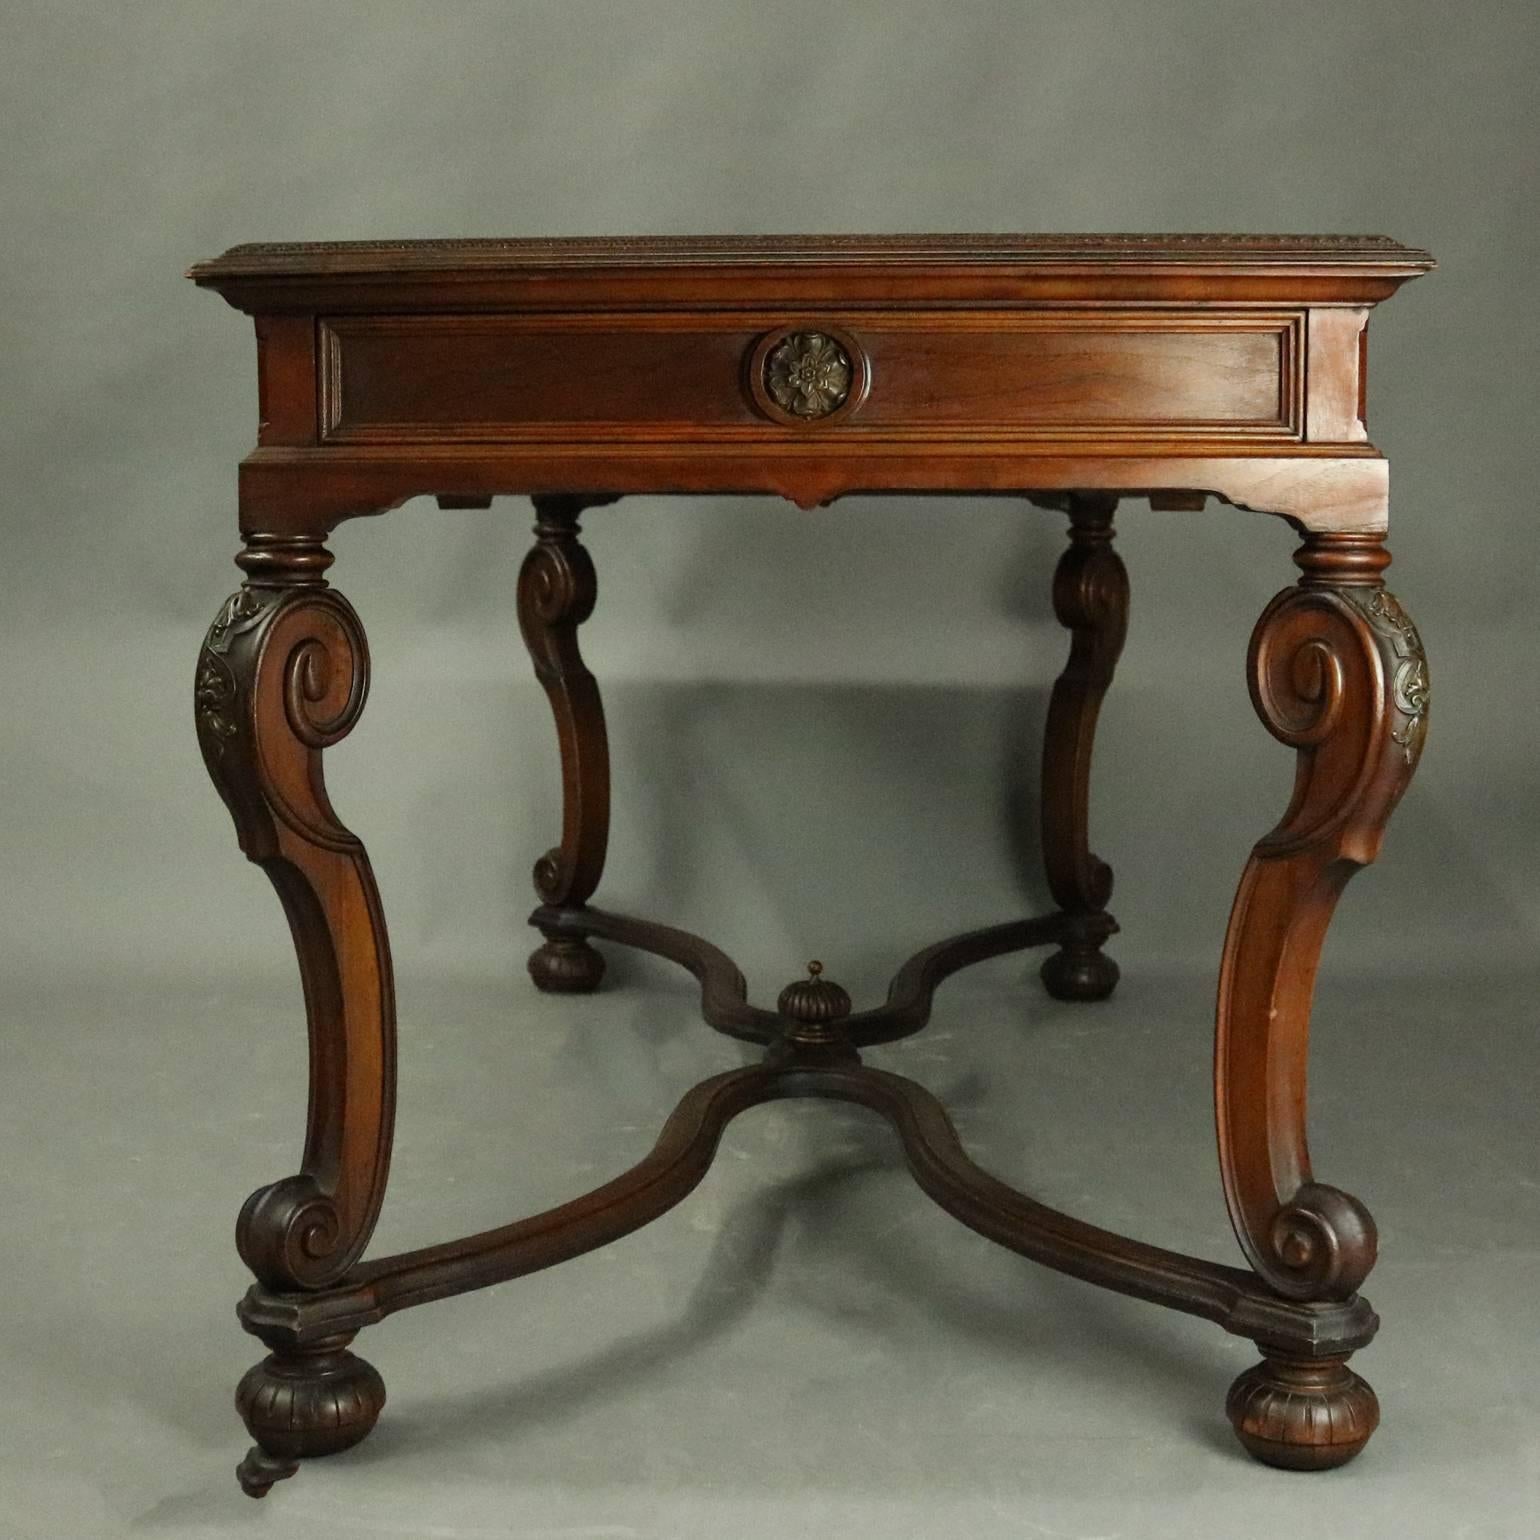 20th Century Antique French Louis XIV Style Carved Walnut and Burl Sofa Table, circa 1920